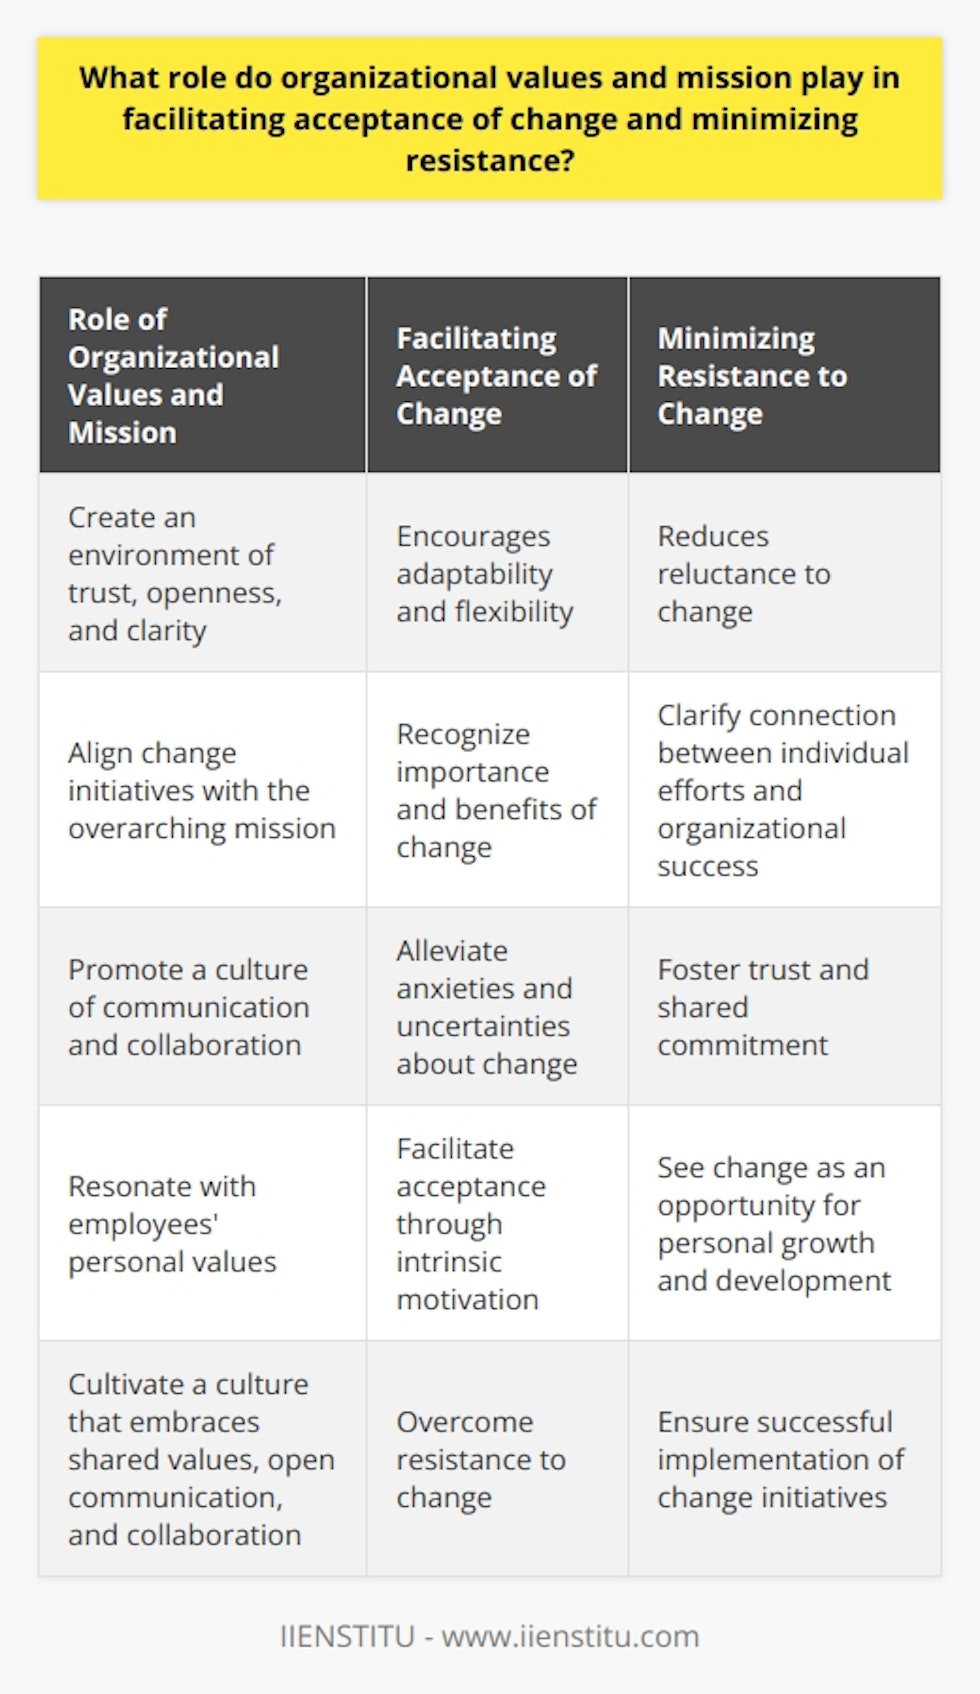 Organizational values and mission play a significant role in facilitating acceptance of change and minimizing resistance within an organization. These factors create an environment of trust, openness, and clarity, which are crucial for encouraging adaptability and flexibility in the face of change. Employees who feel connected to their organization's values are more likely to exhibit a greater willingness to adapt to new situations and thus demonstrate a higher acceptance of change.The mission of an organization provides a sense of direction and purpose for its employees. When change initiatives align with the overarching mission, employees are more likely to recognize the importance of the change and perceive it as beneficial for achieving organizational goals. This alignment can reduce resistance to change by clarifying the connection between individual efforts and organizational success.Organizational values and mission also promote a culture of communication and collaboration. Employees need to feel heard and involved in the decision-making process, which can alleviate their anxieties and uncertainties about change. By promoting dialogue and addressing concerns, organizations can foster a climate of trust and shared commitment that is most conducive to reaching consensus and embracing new ways of working.Furthermore, when organizational values and mission resonate with employees' personal values, it can further facilitate the acceptance of change. When employees perceive their values as aligned with those of the organization, they are more likely to be intrinsically motivated and committed to the organization's success. This commitment reduces reluctance and resistance to change, as employees are more likely to see change as an opportunity for personal growth and development.In conclusion, organizational values and mission are essential for facilitating acceptance of change and minimizing resistance among employees. By cultivating a culture that embraces shared values, open communication, and collaboration, organizations can effectively overcome resistance to change and ensure the successful implementation of their change initiatives.